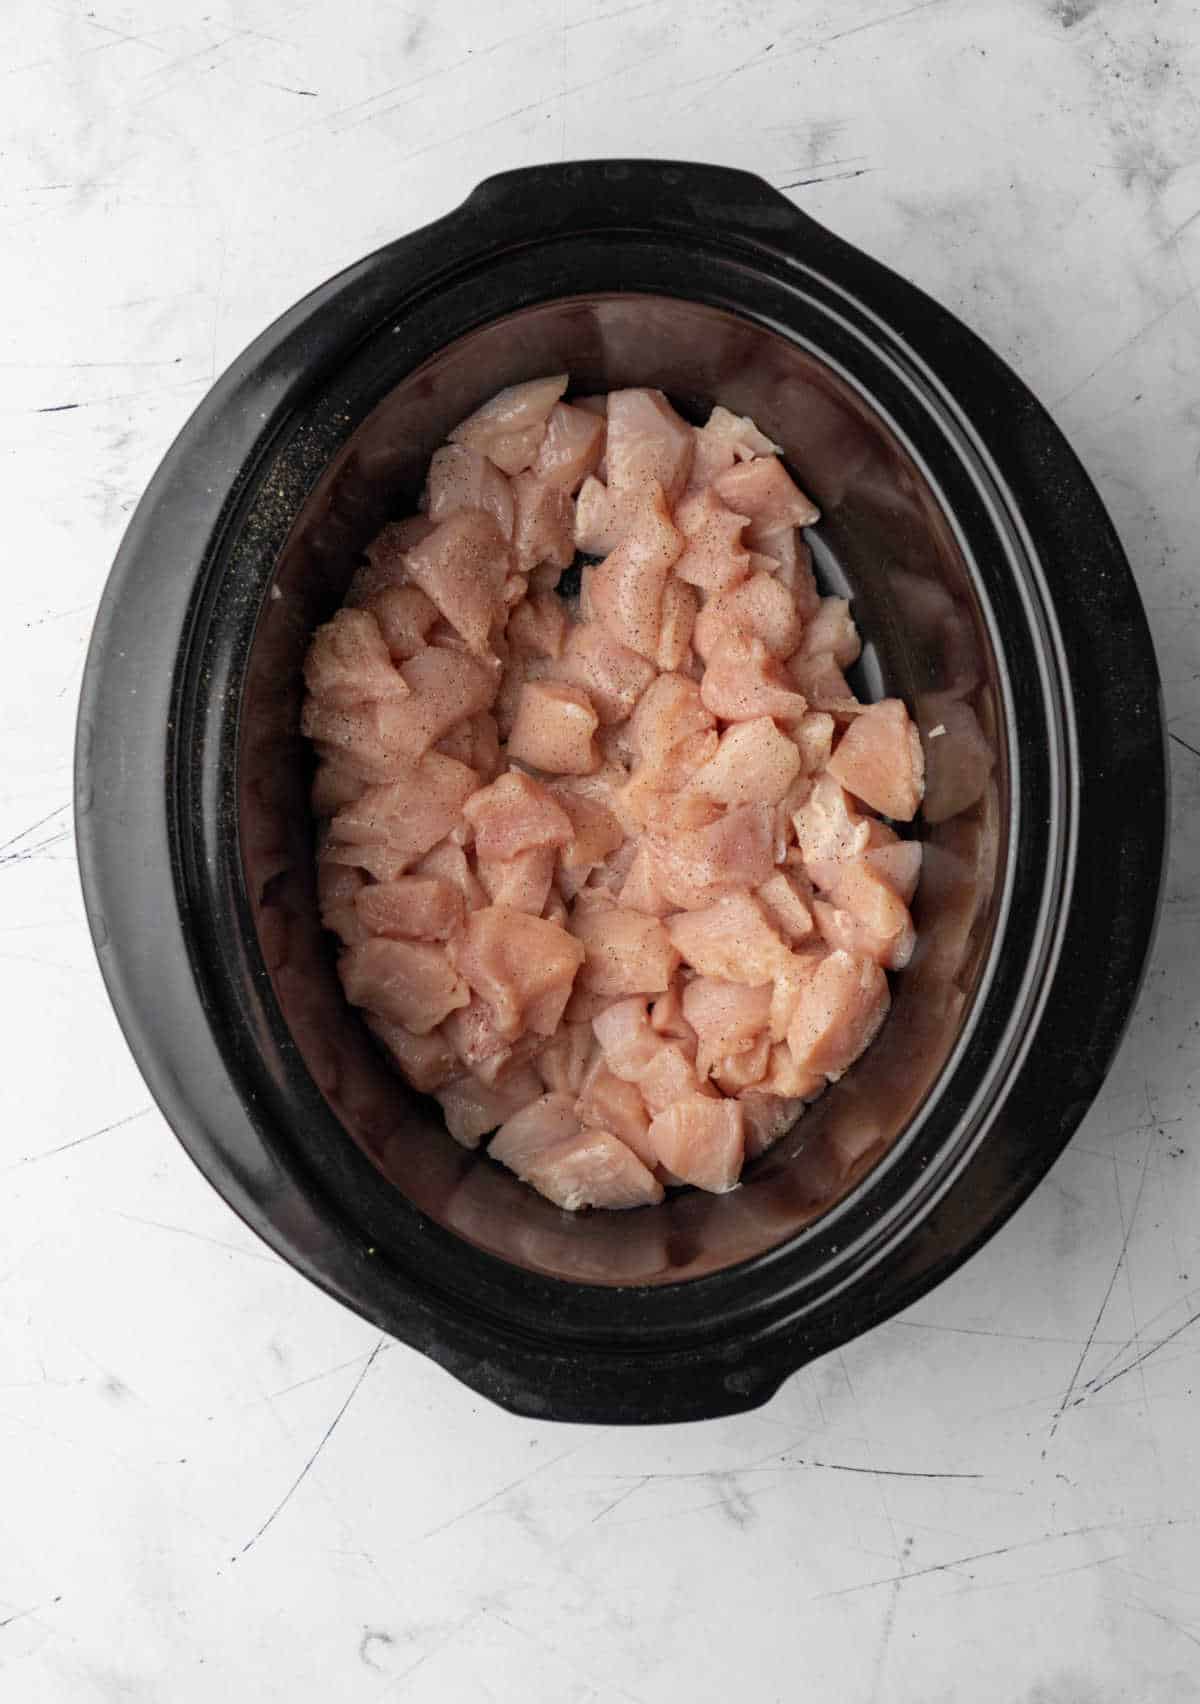 Cut up chicken breast in a slow cooker. 